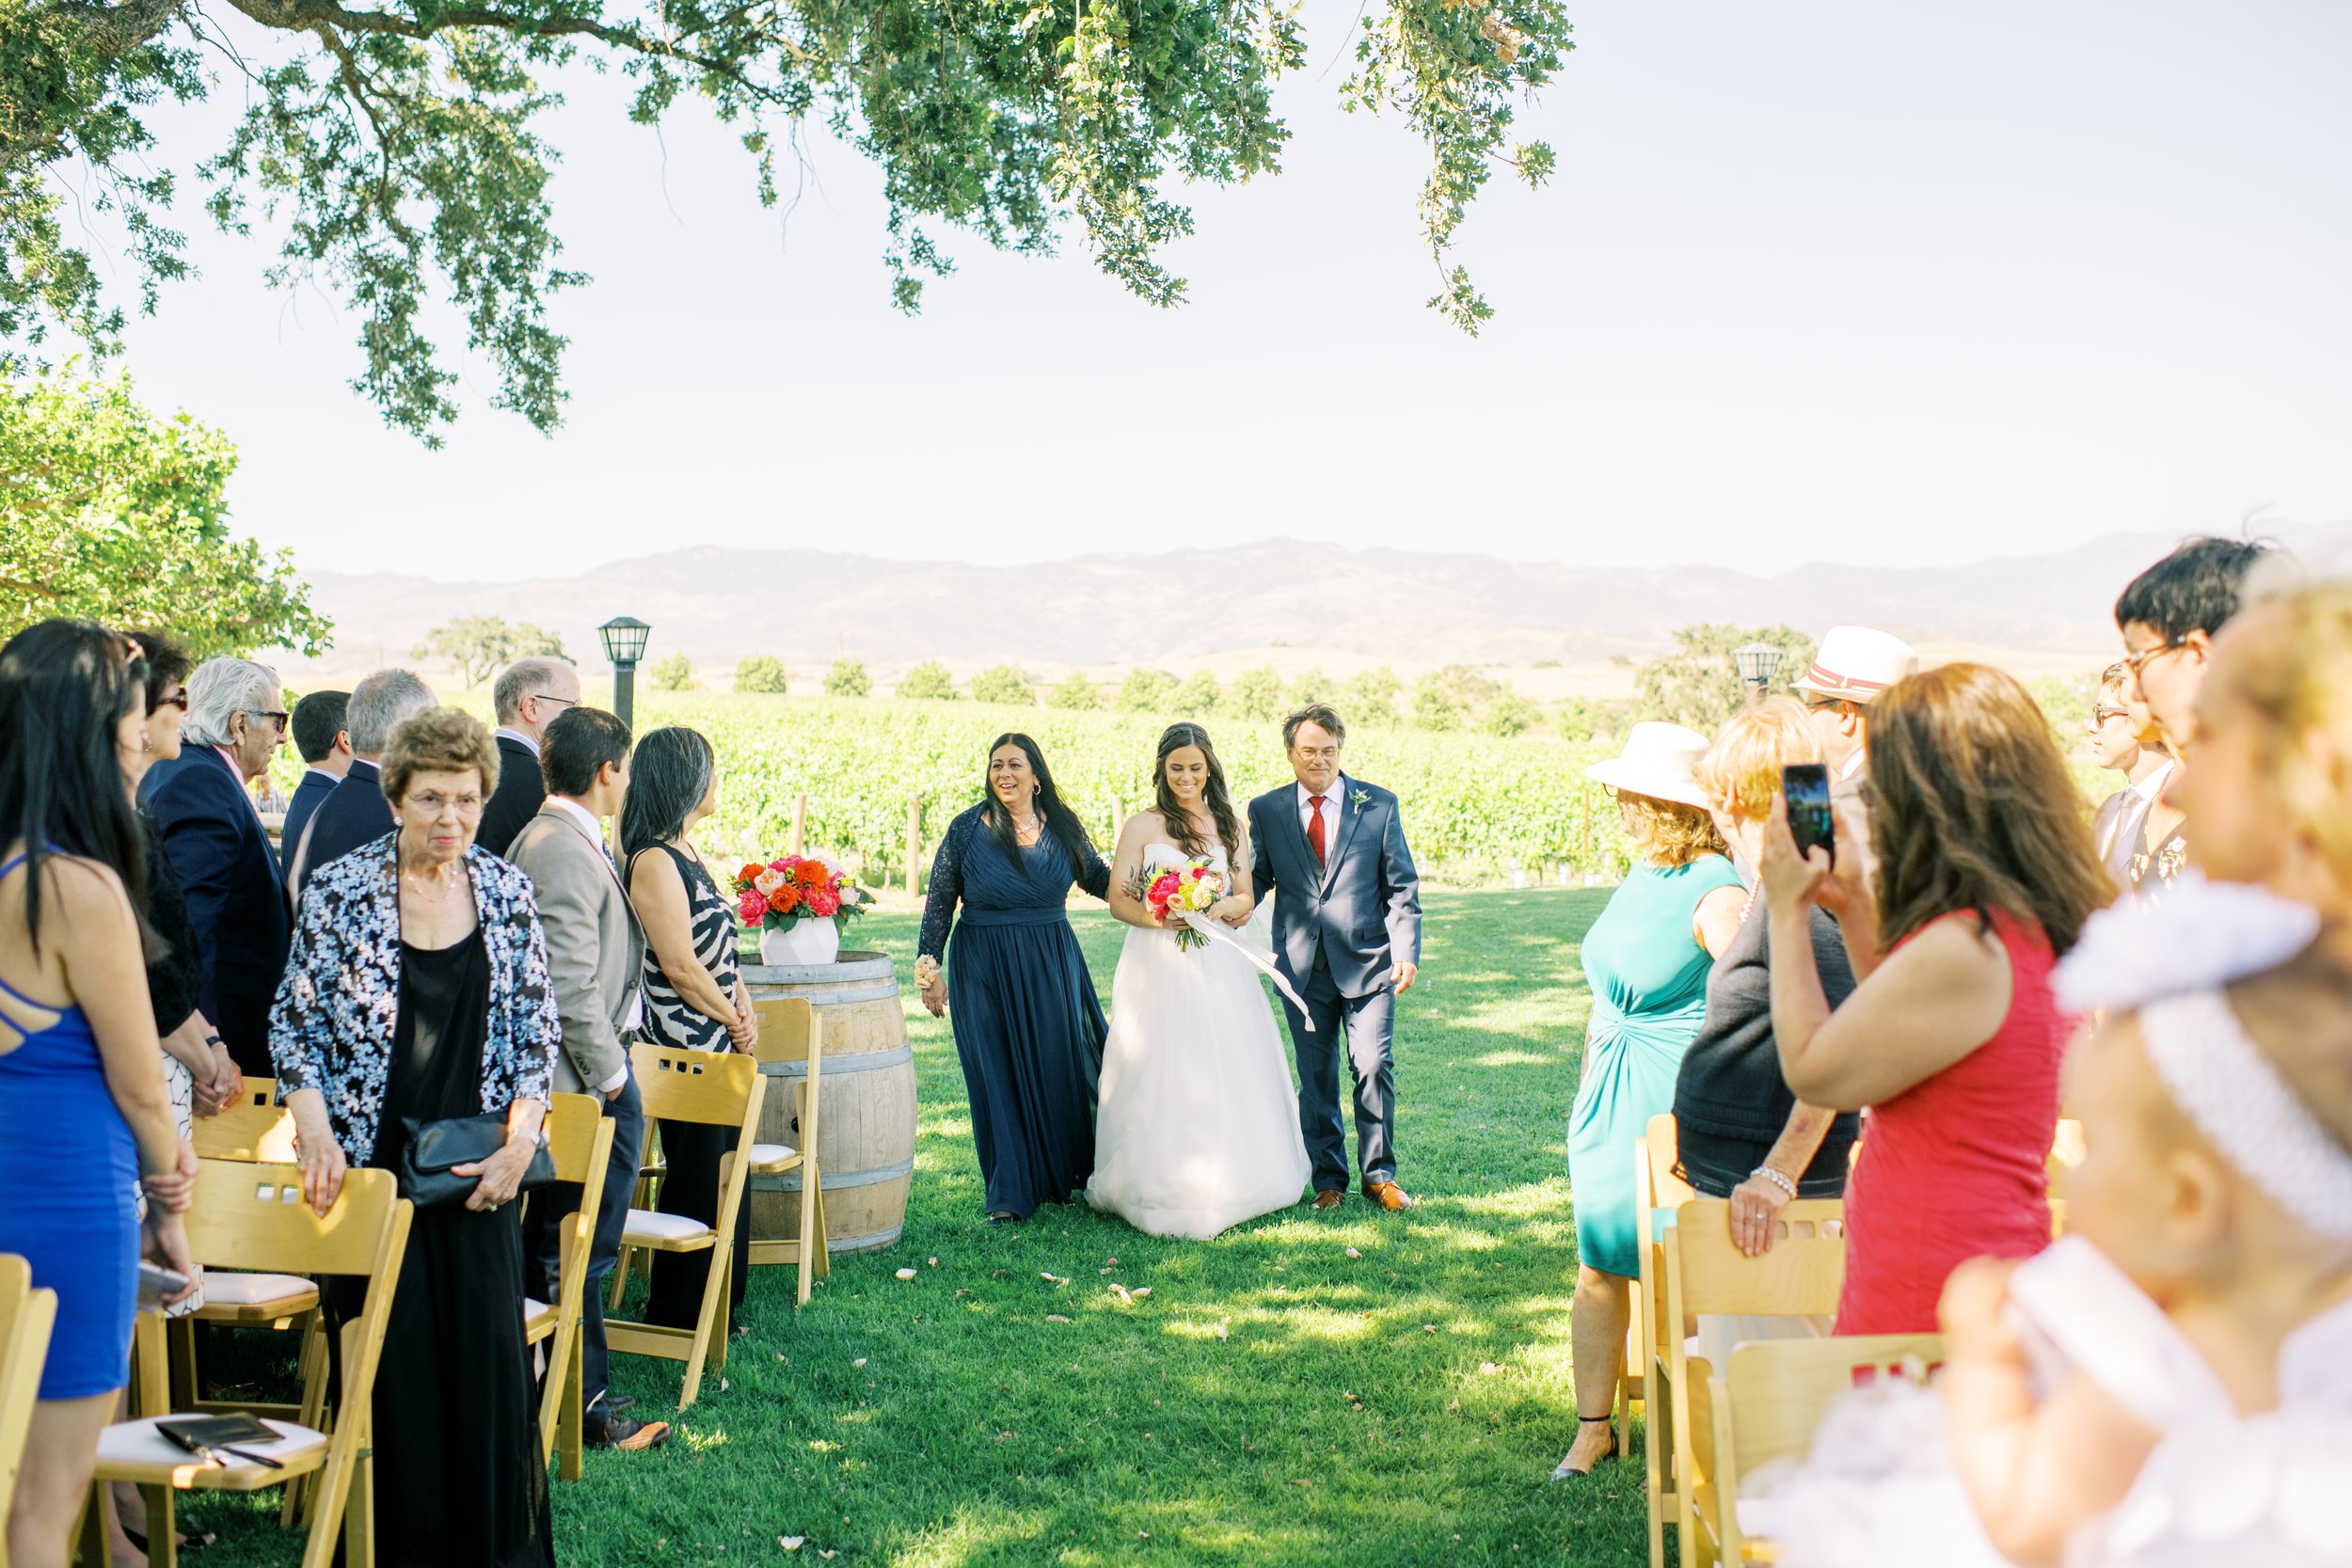 www.santabarbarawedding.com | Loveridge Photography | Gainey Vineyard | Amber Alyse Events | Besame Floral | Bright Event Rentals | Lucky Devils Band | Bride Coming Down the Aisle